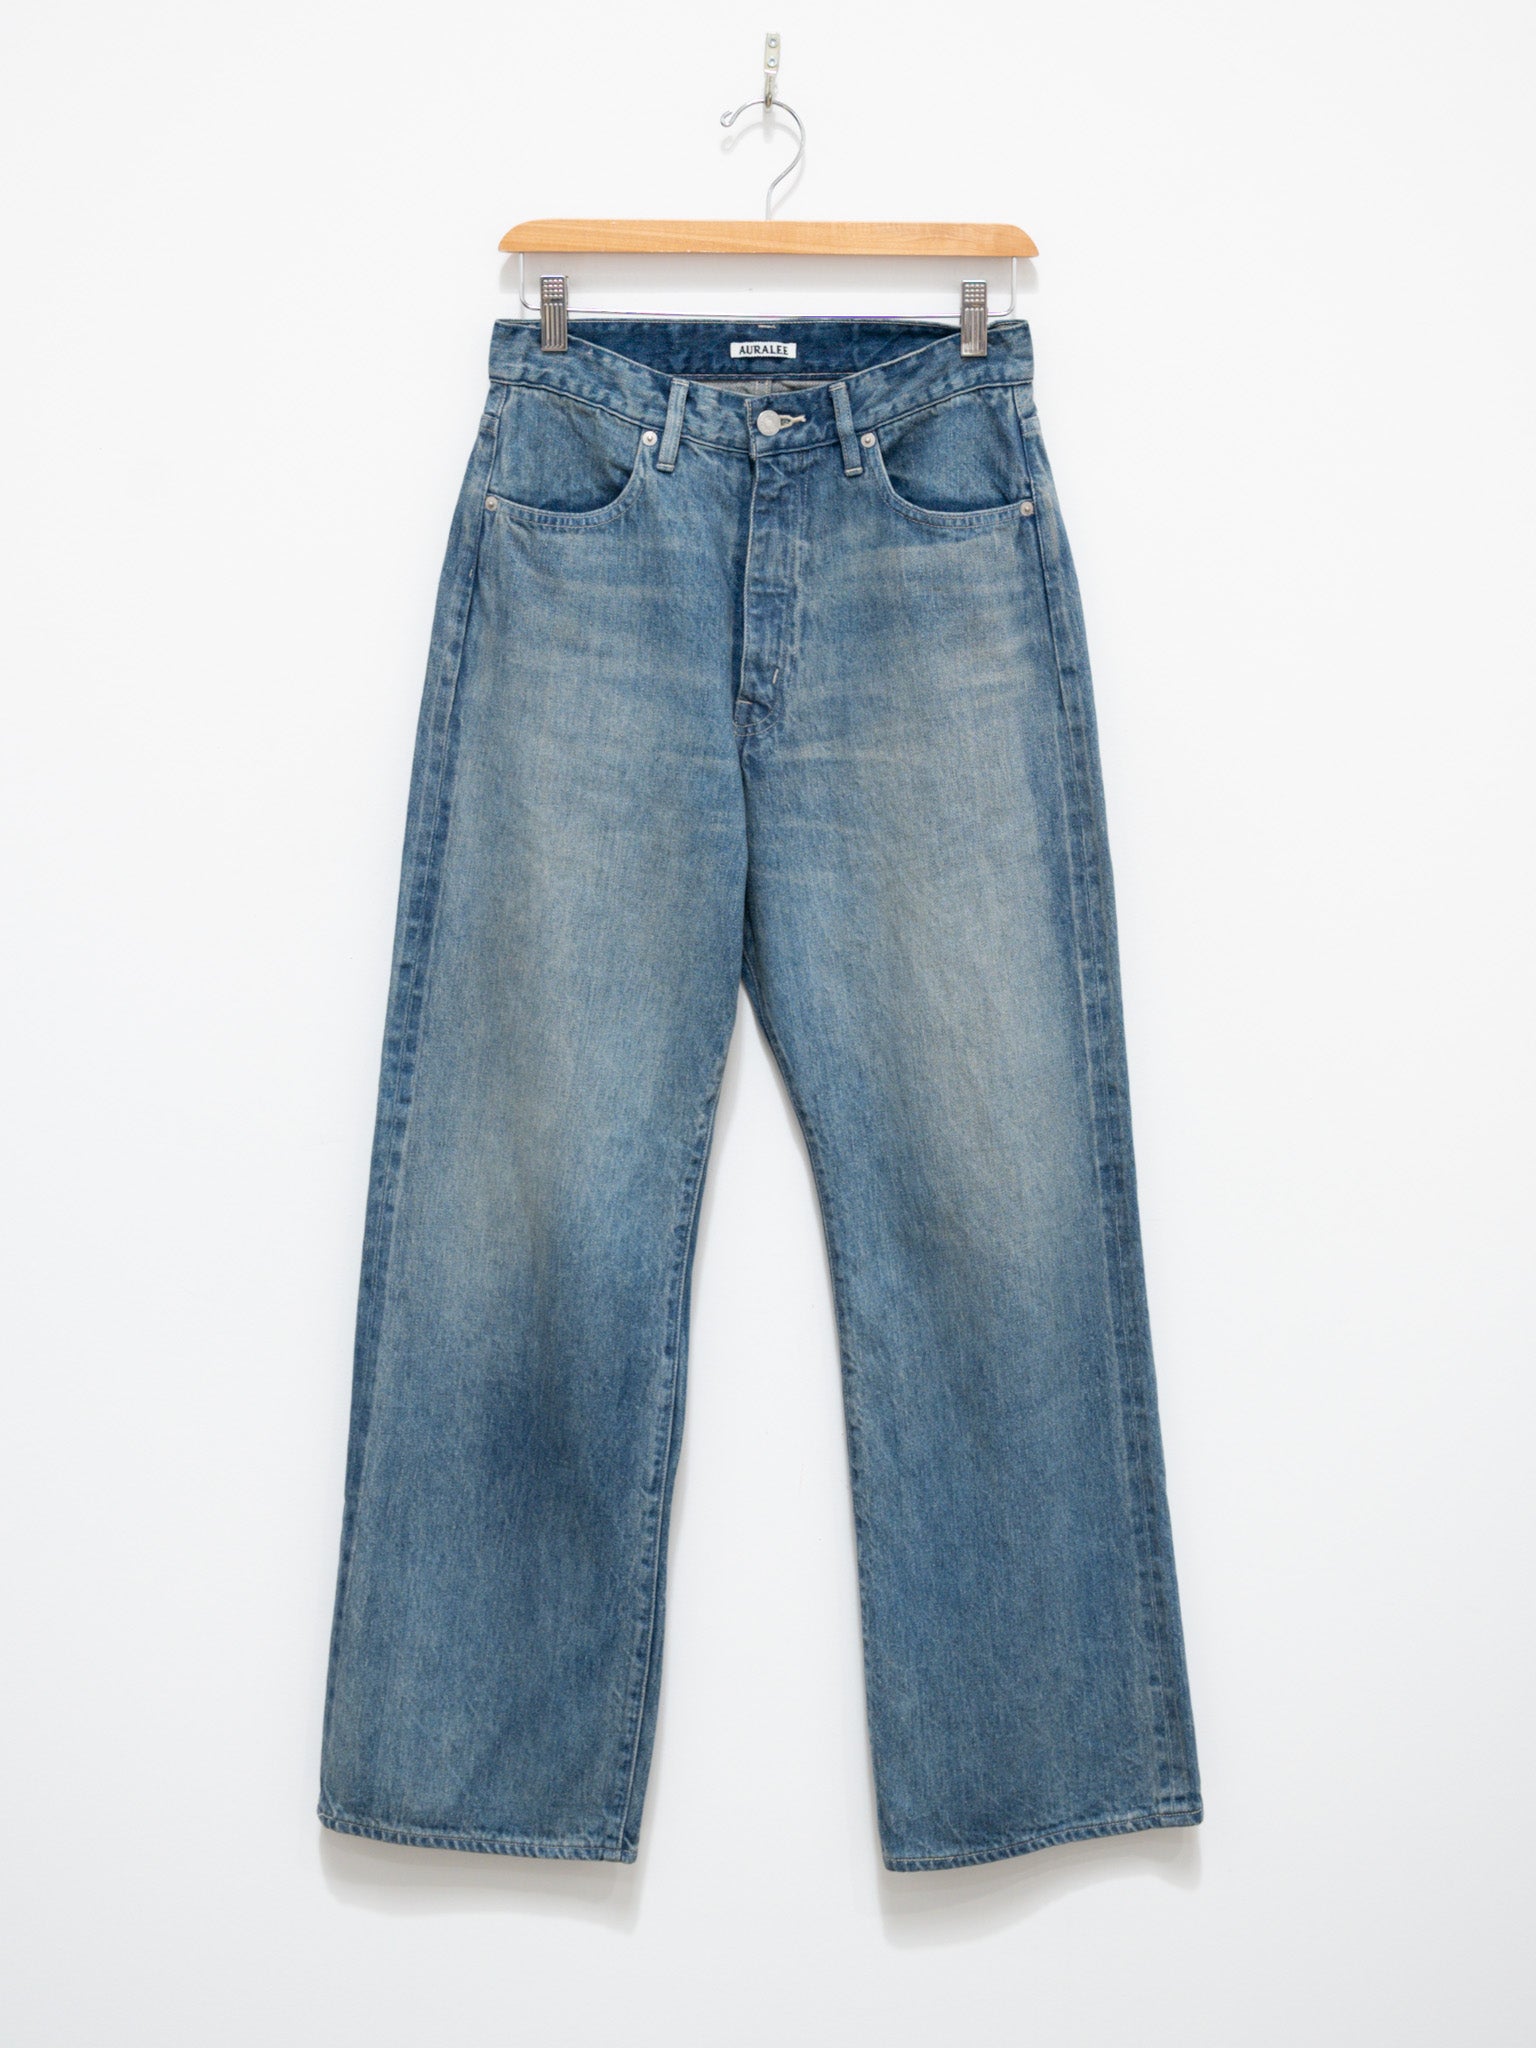 Buy Y&F Kids Ice Blue Washed Seam Detail Denim Jeans from Westside